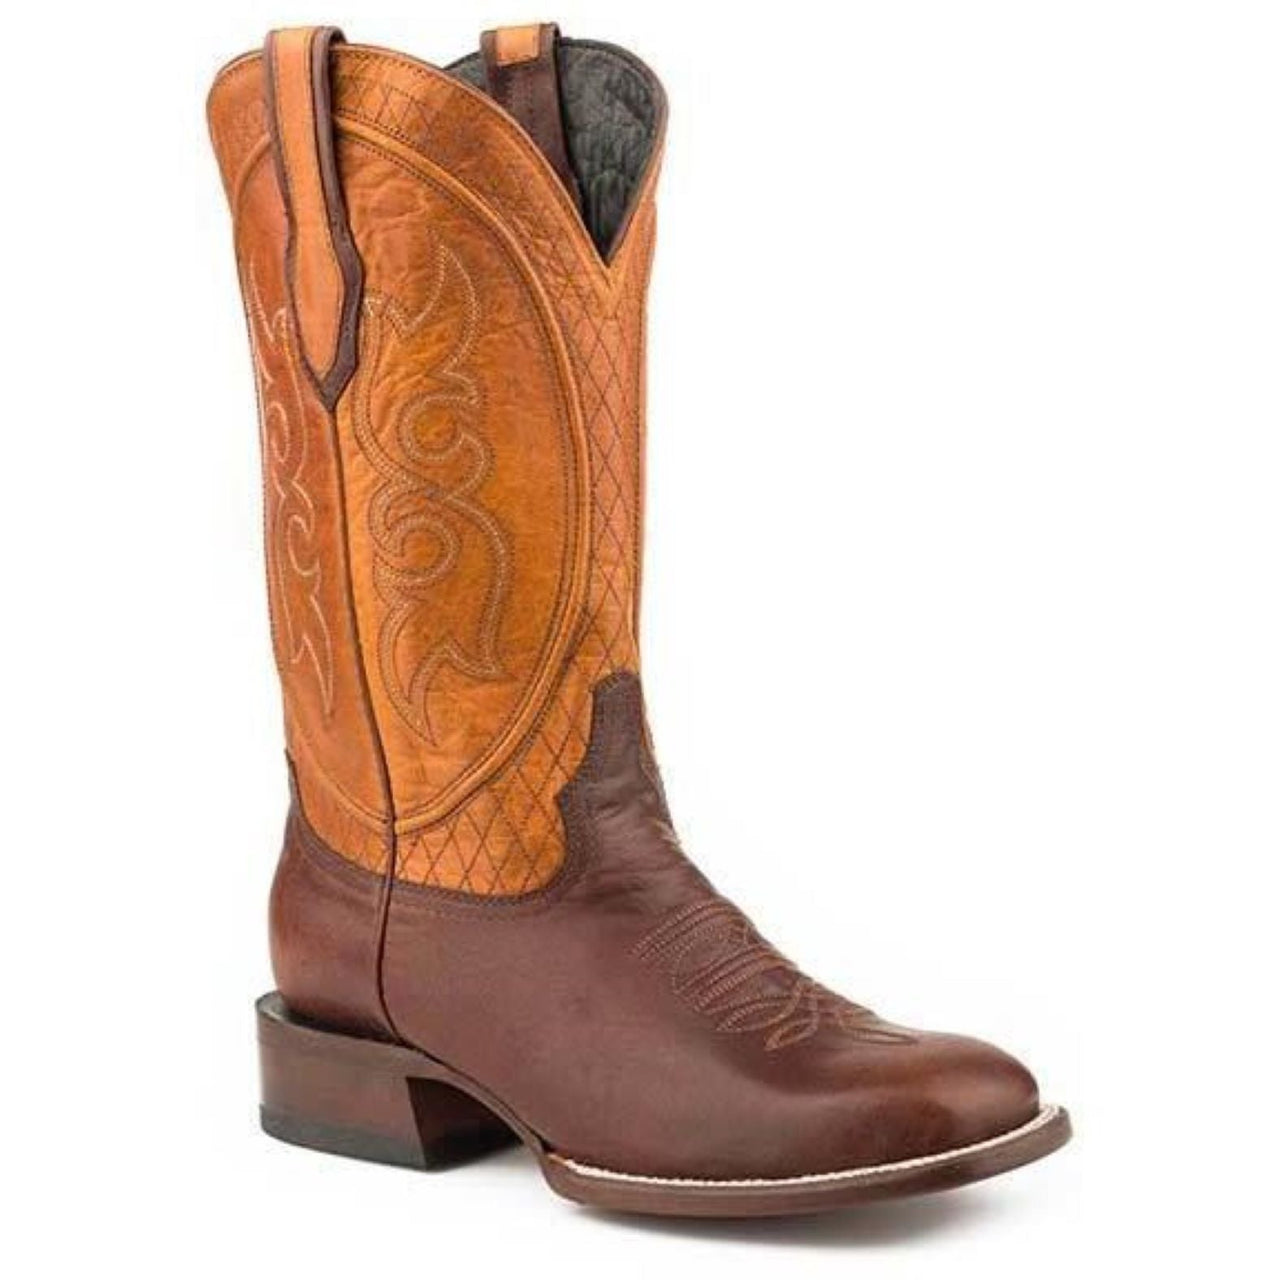 Men's Stetson Butte Brown Calf Boots Handcrafted JBS Collection - yeehawcowboy